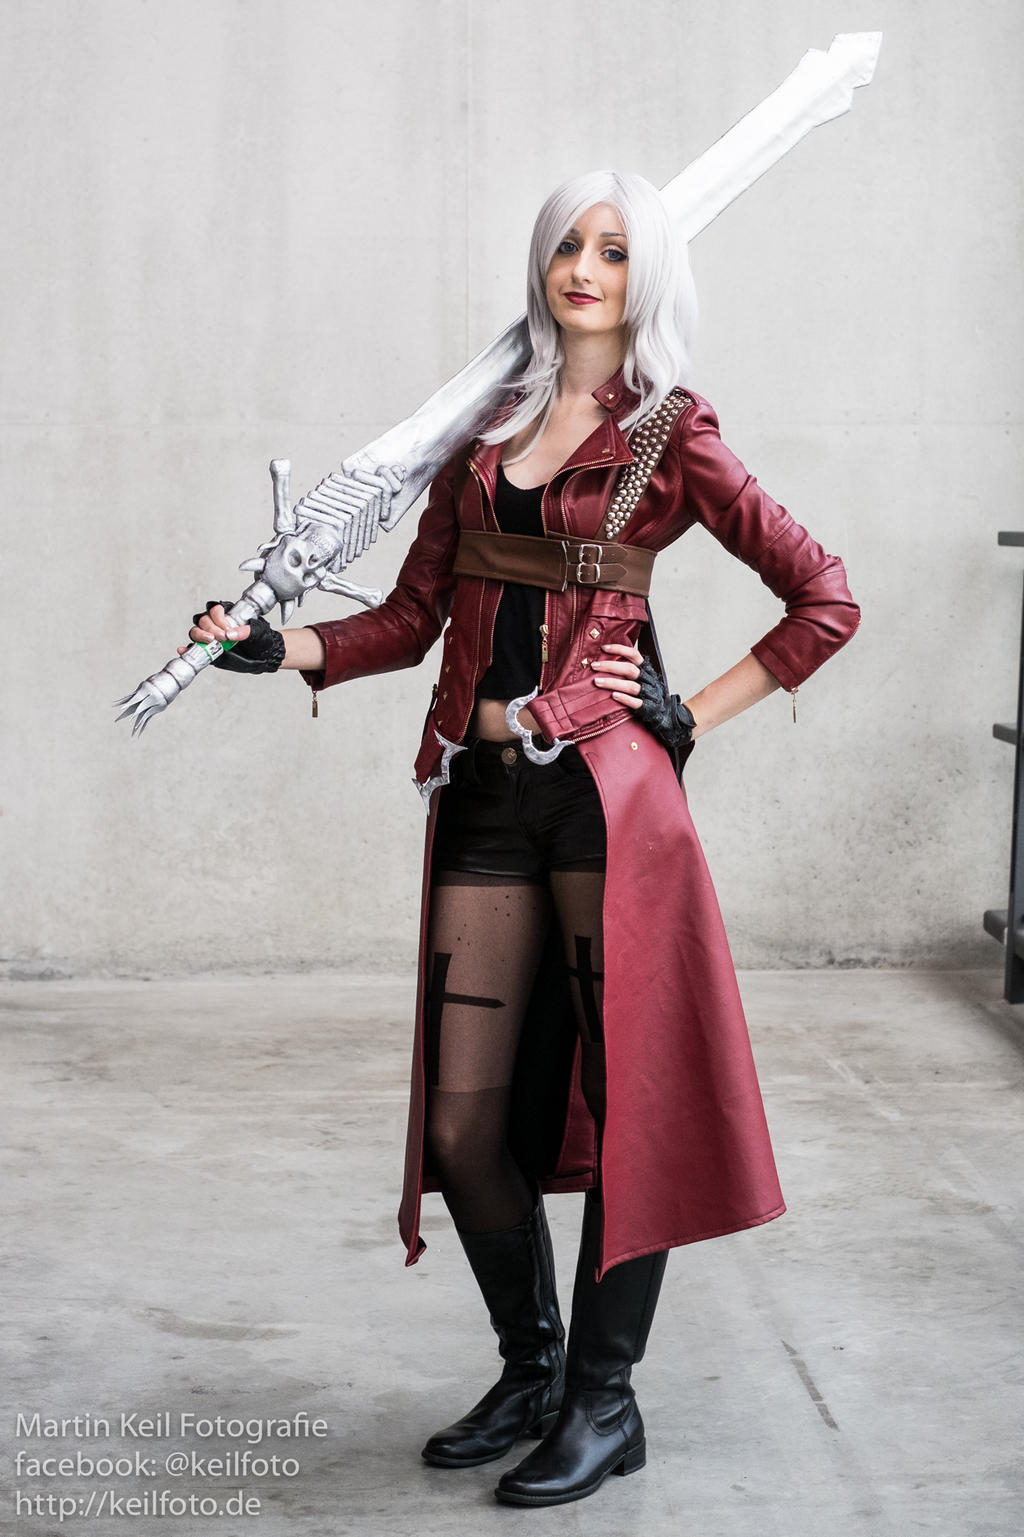 Women of Devil May Cry